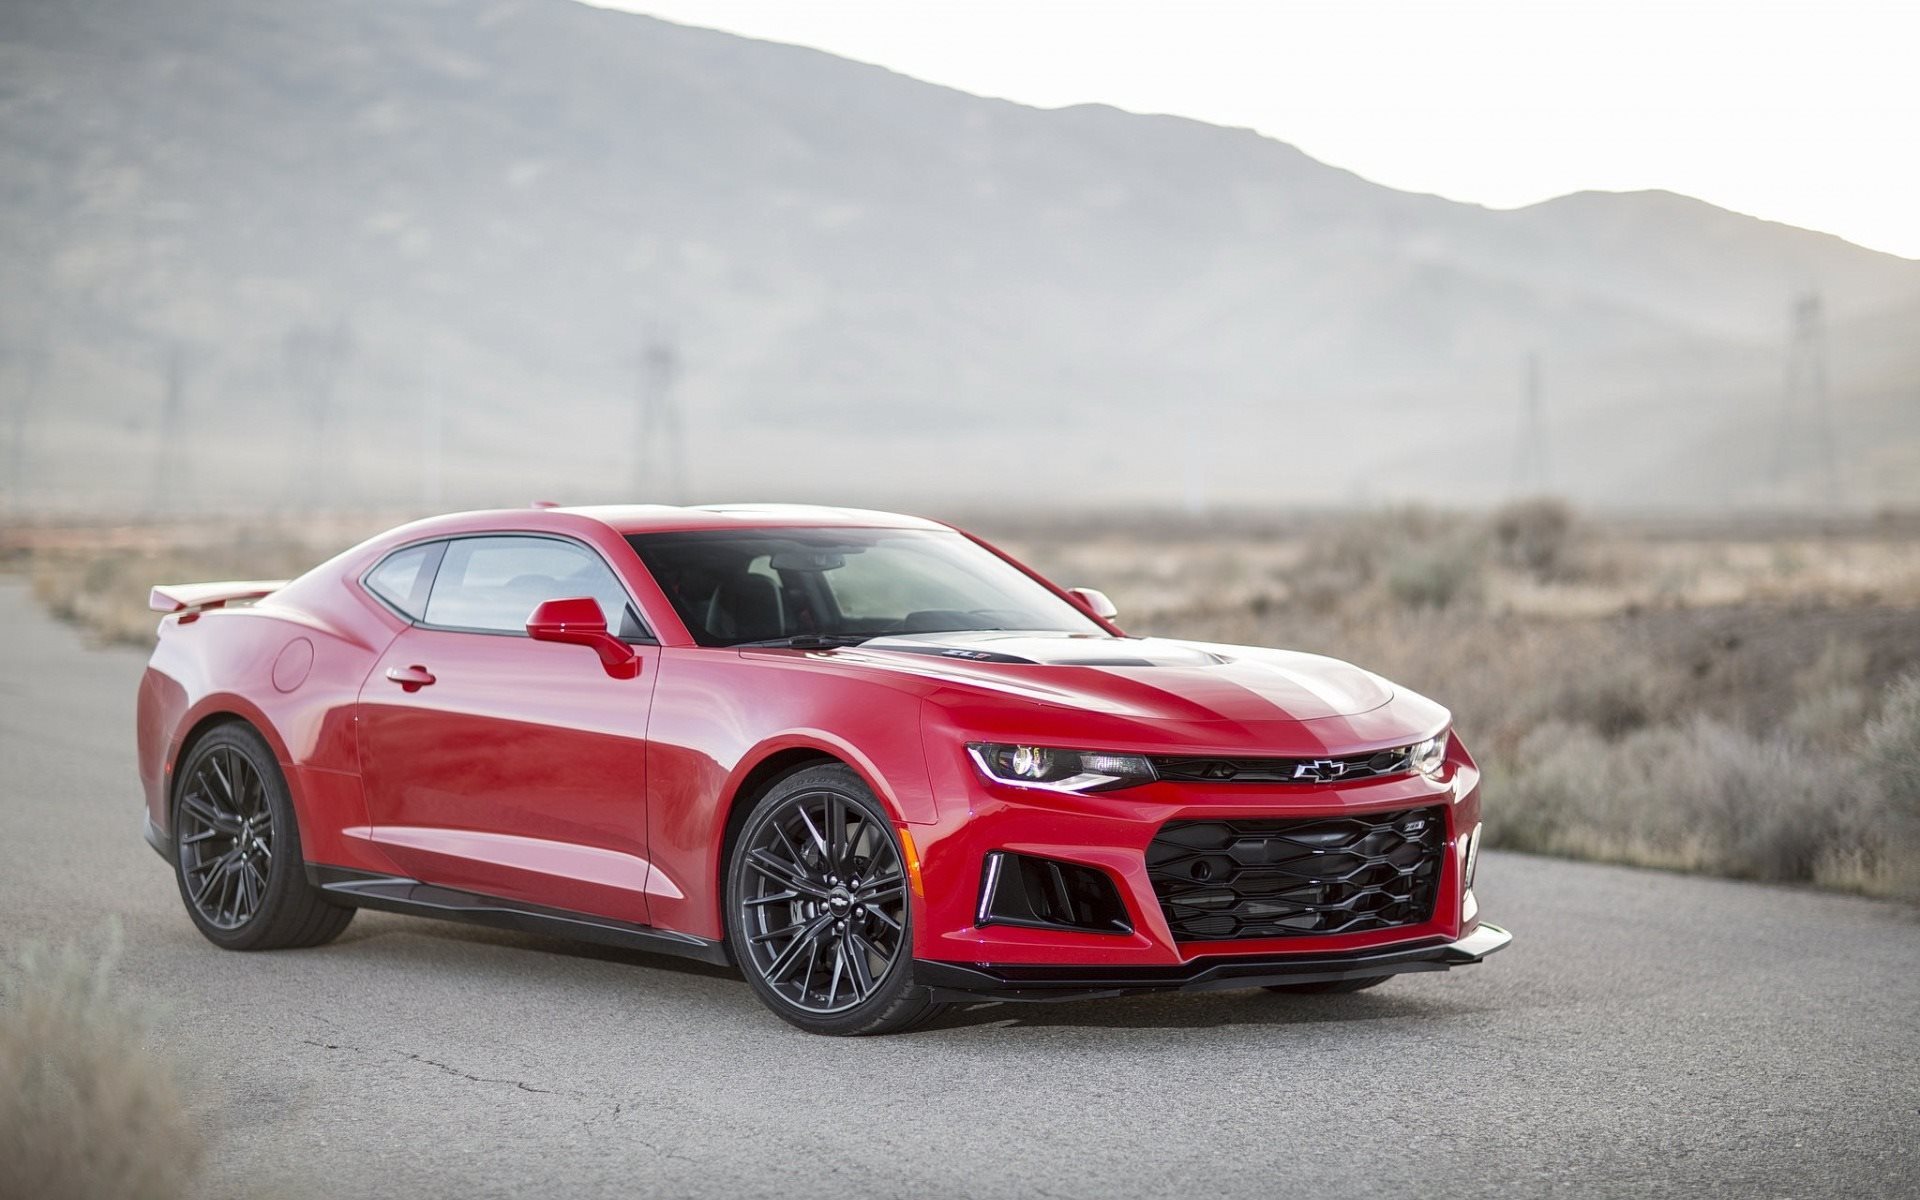 Download wallpapers Chevrolet Camaro, ZL1, Red Camaro, sports cars